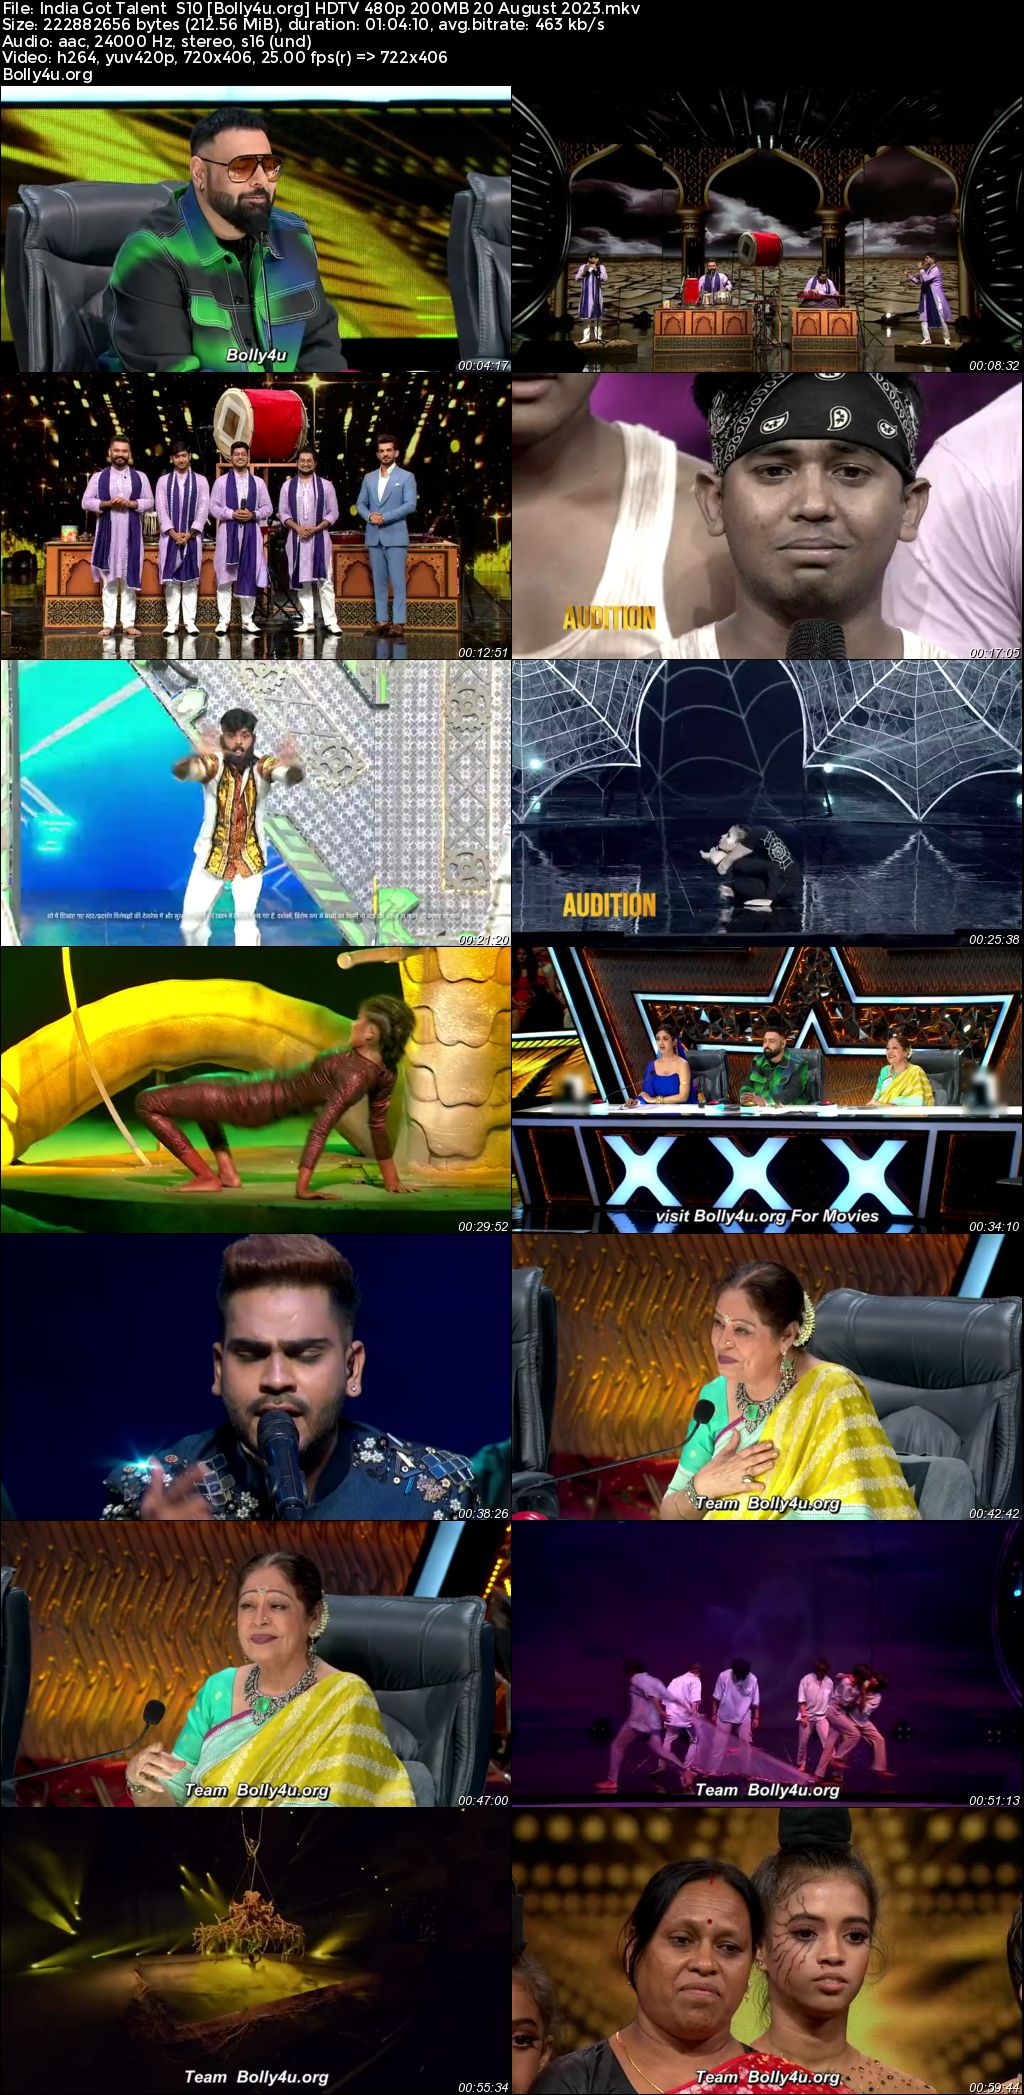 India Got Talent S10 HDTV 480p 200MB 20 August 2023 Download